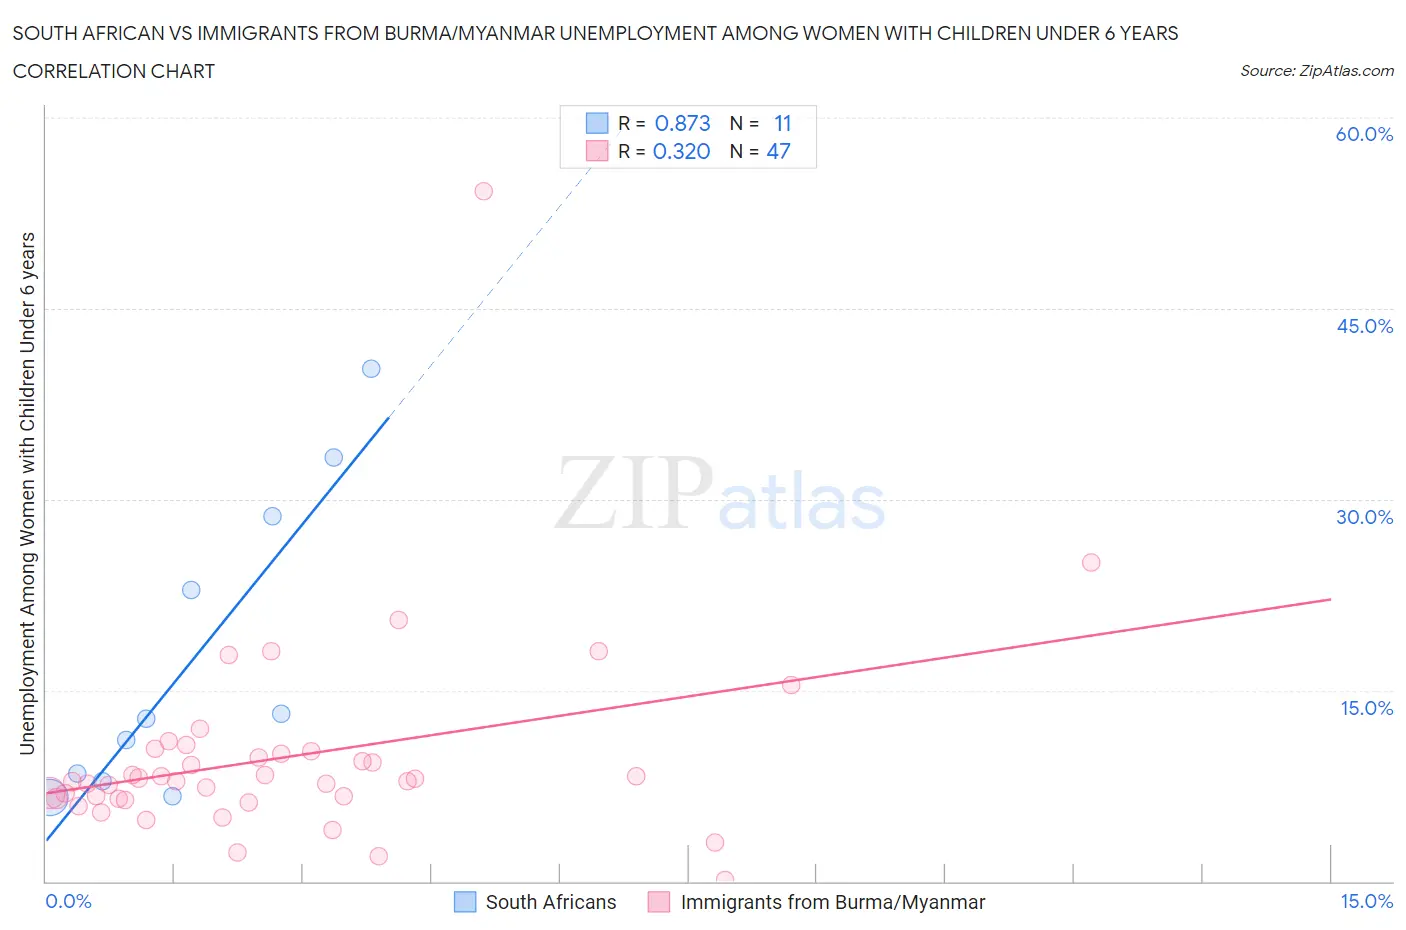 South African vs Immigrants from Burma/Myanmar Unemployment Among Women with Children Under 6 years